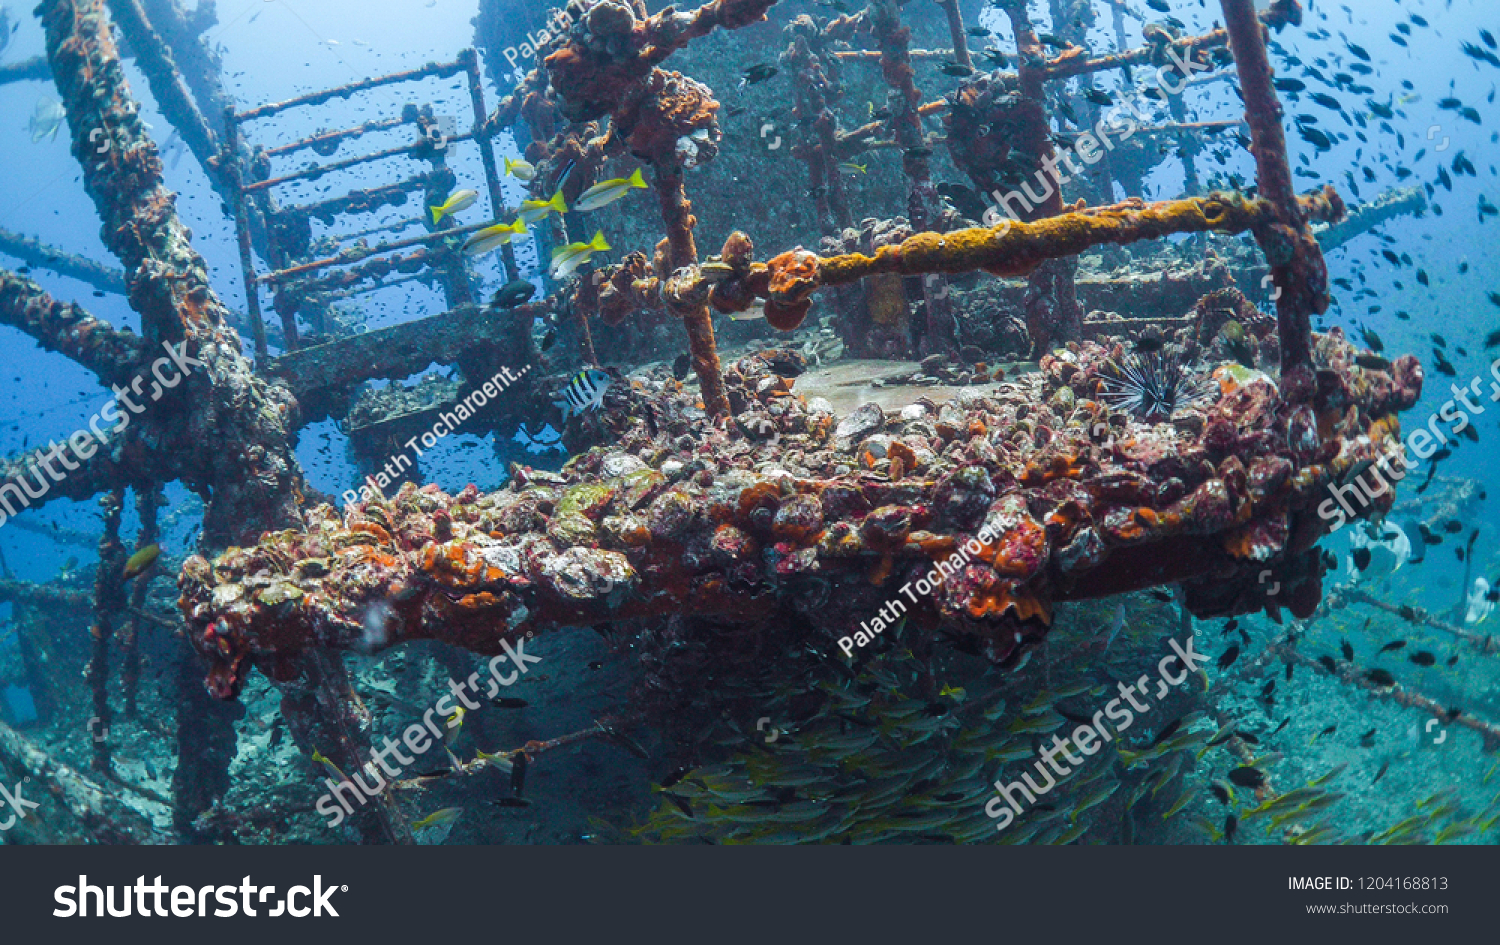 Ship wreck is new house for underwater animal as fish. #1204168813